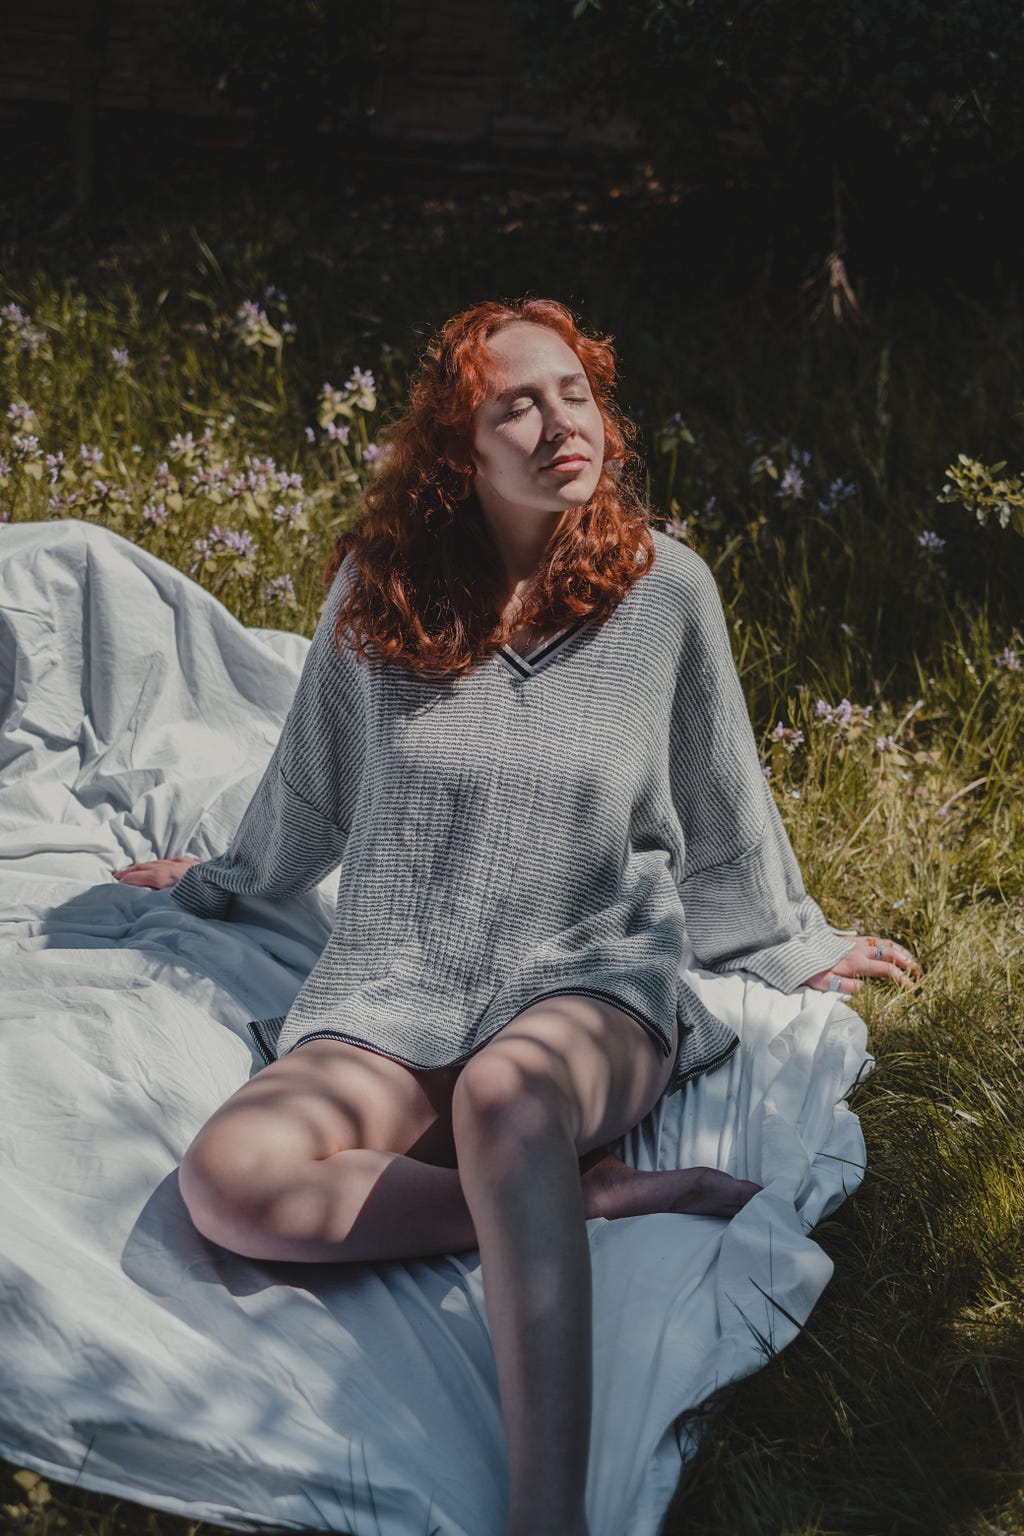 a female redhead soaking þe sun while sitting on a blanket in a meadow wearing grey.